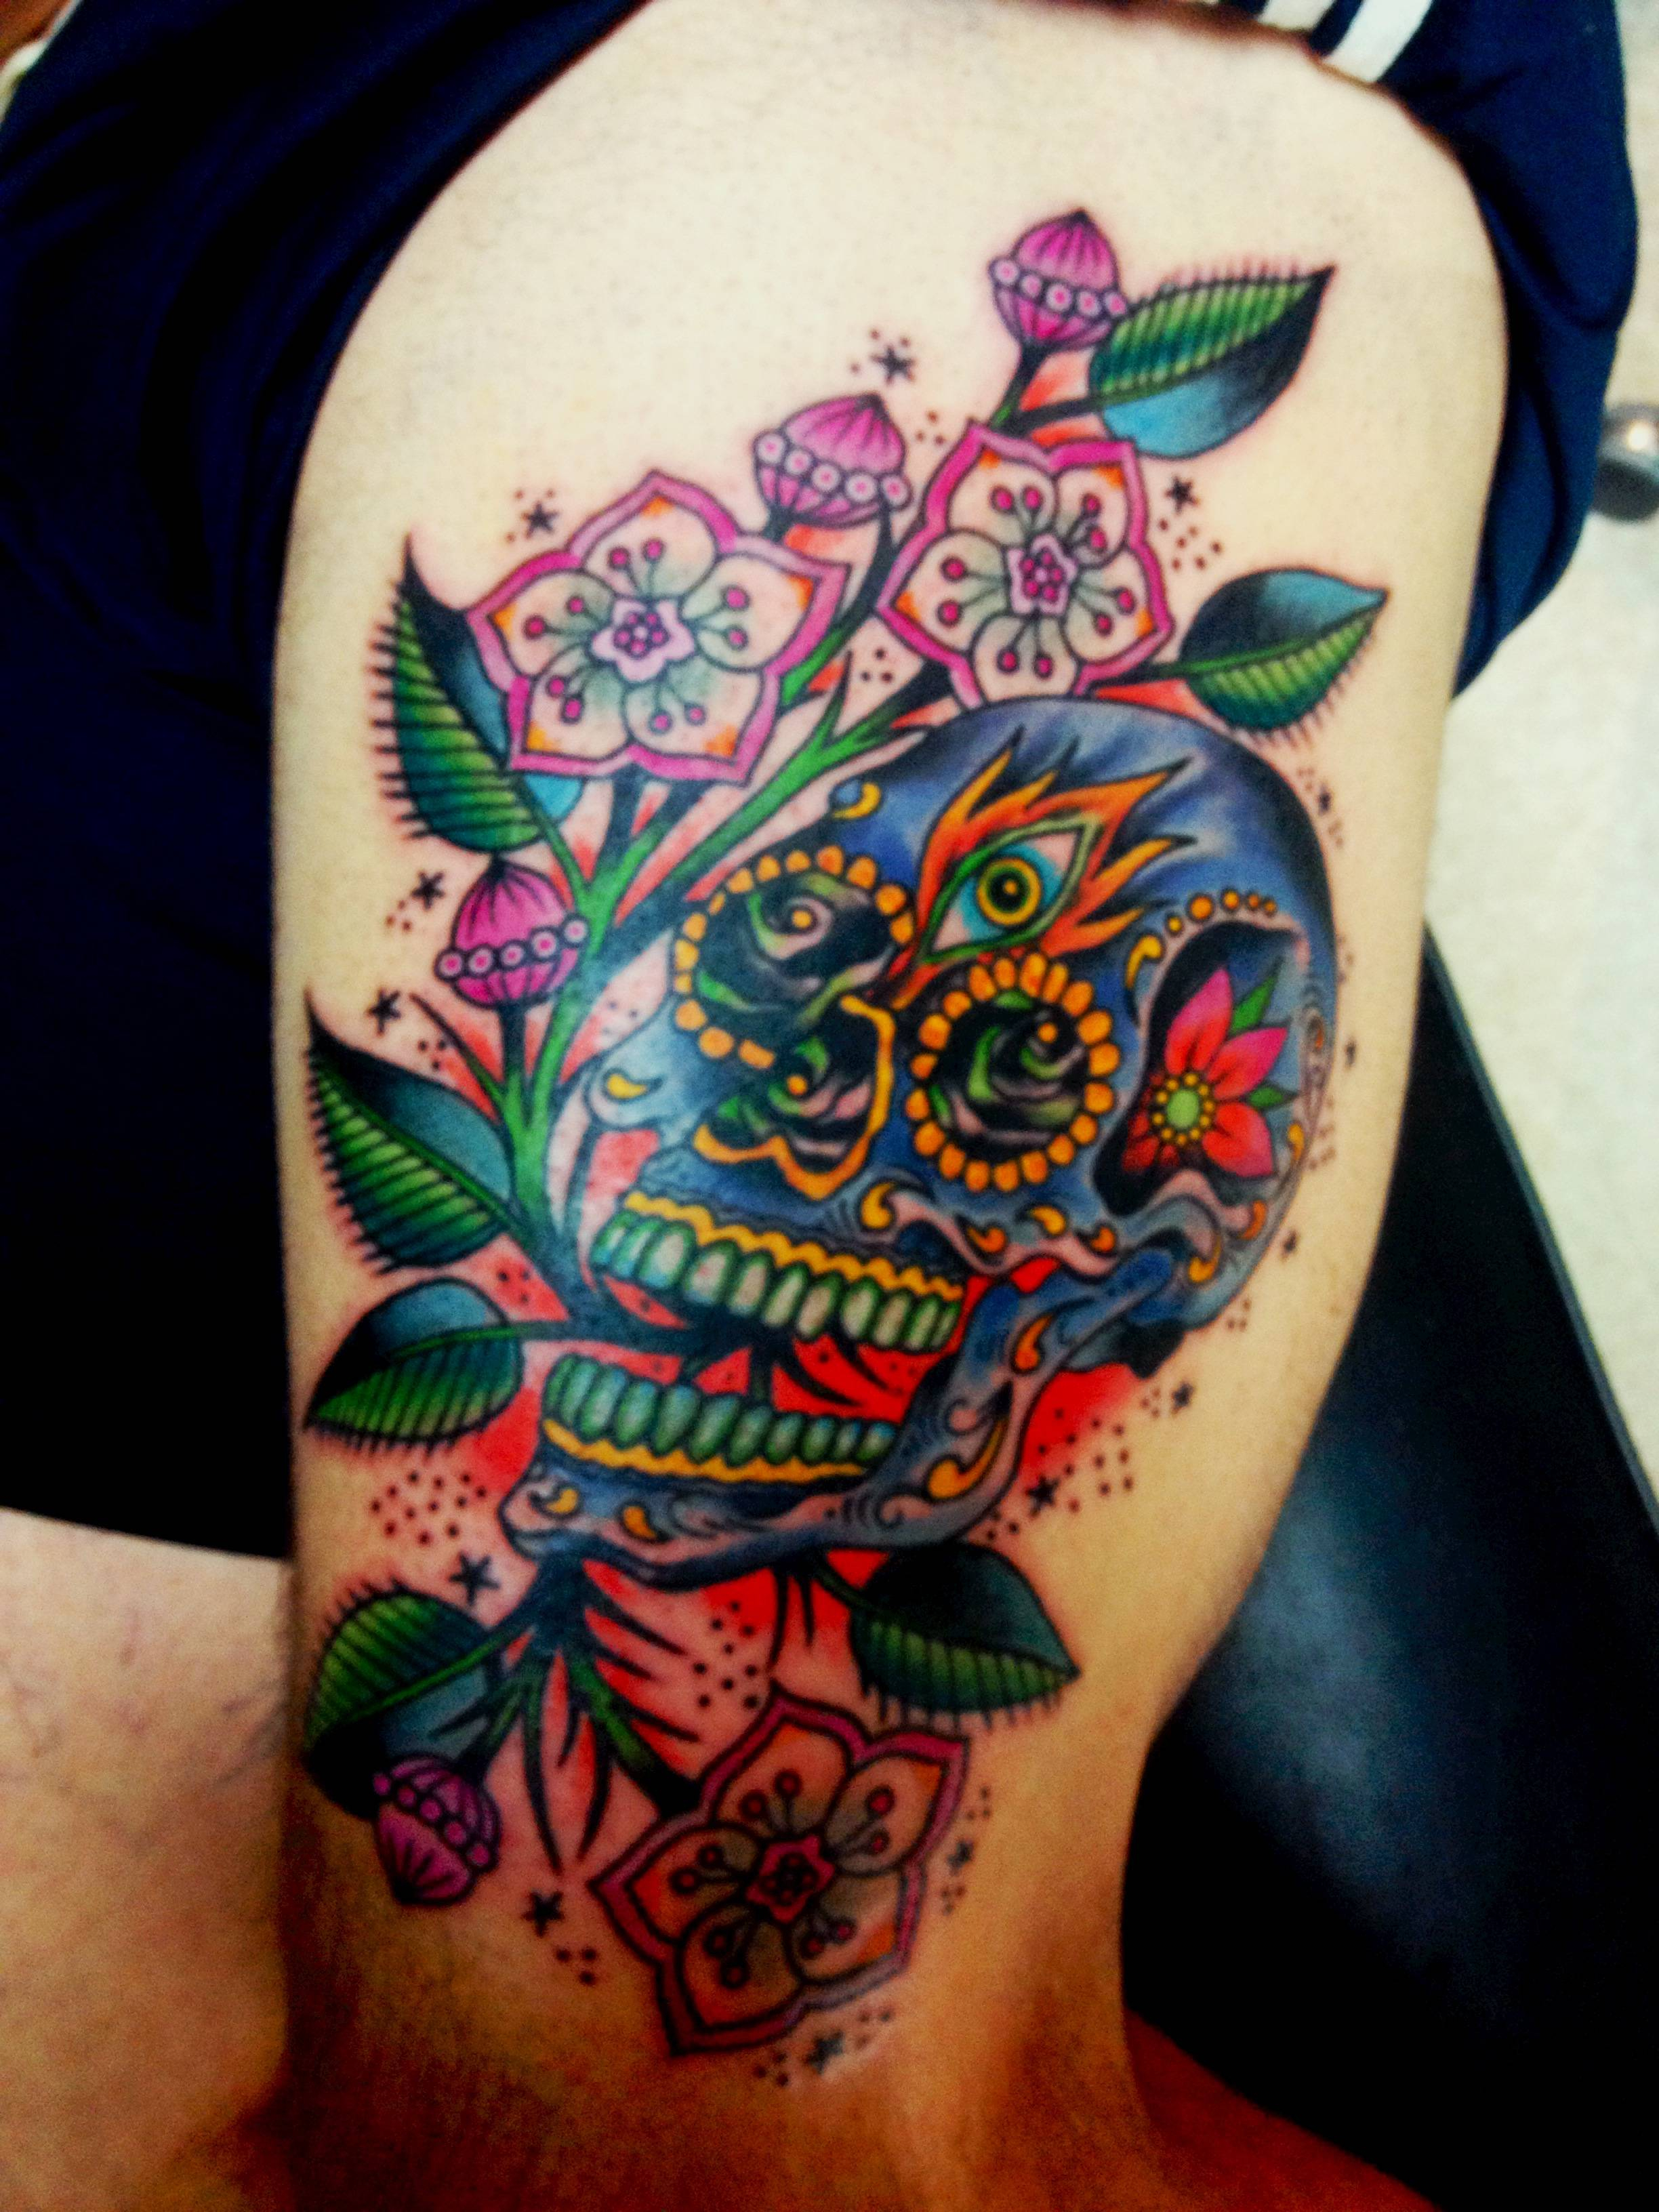 27 Colorful Sugar Skull Tattoo Designs And Meanings Tattoos Win intended for measurements 2448 X 3264